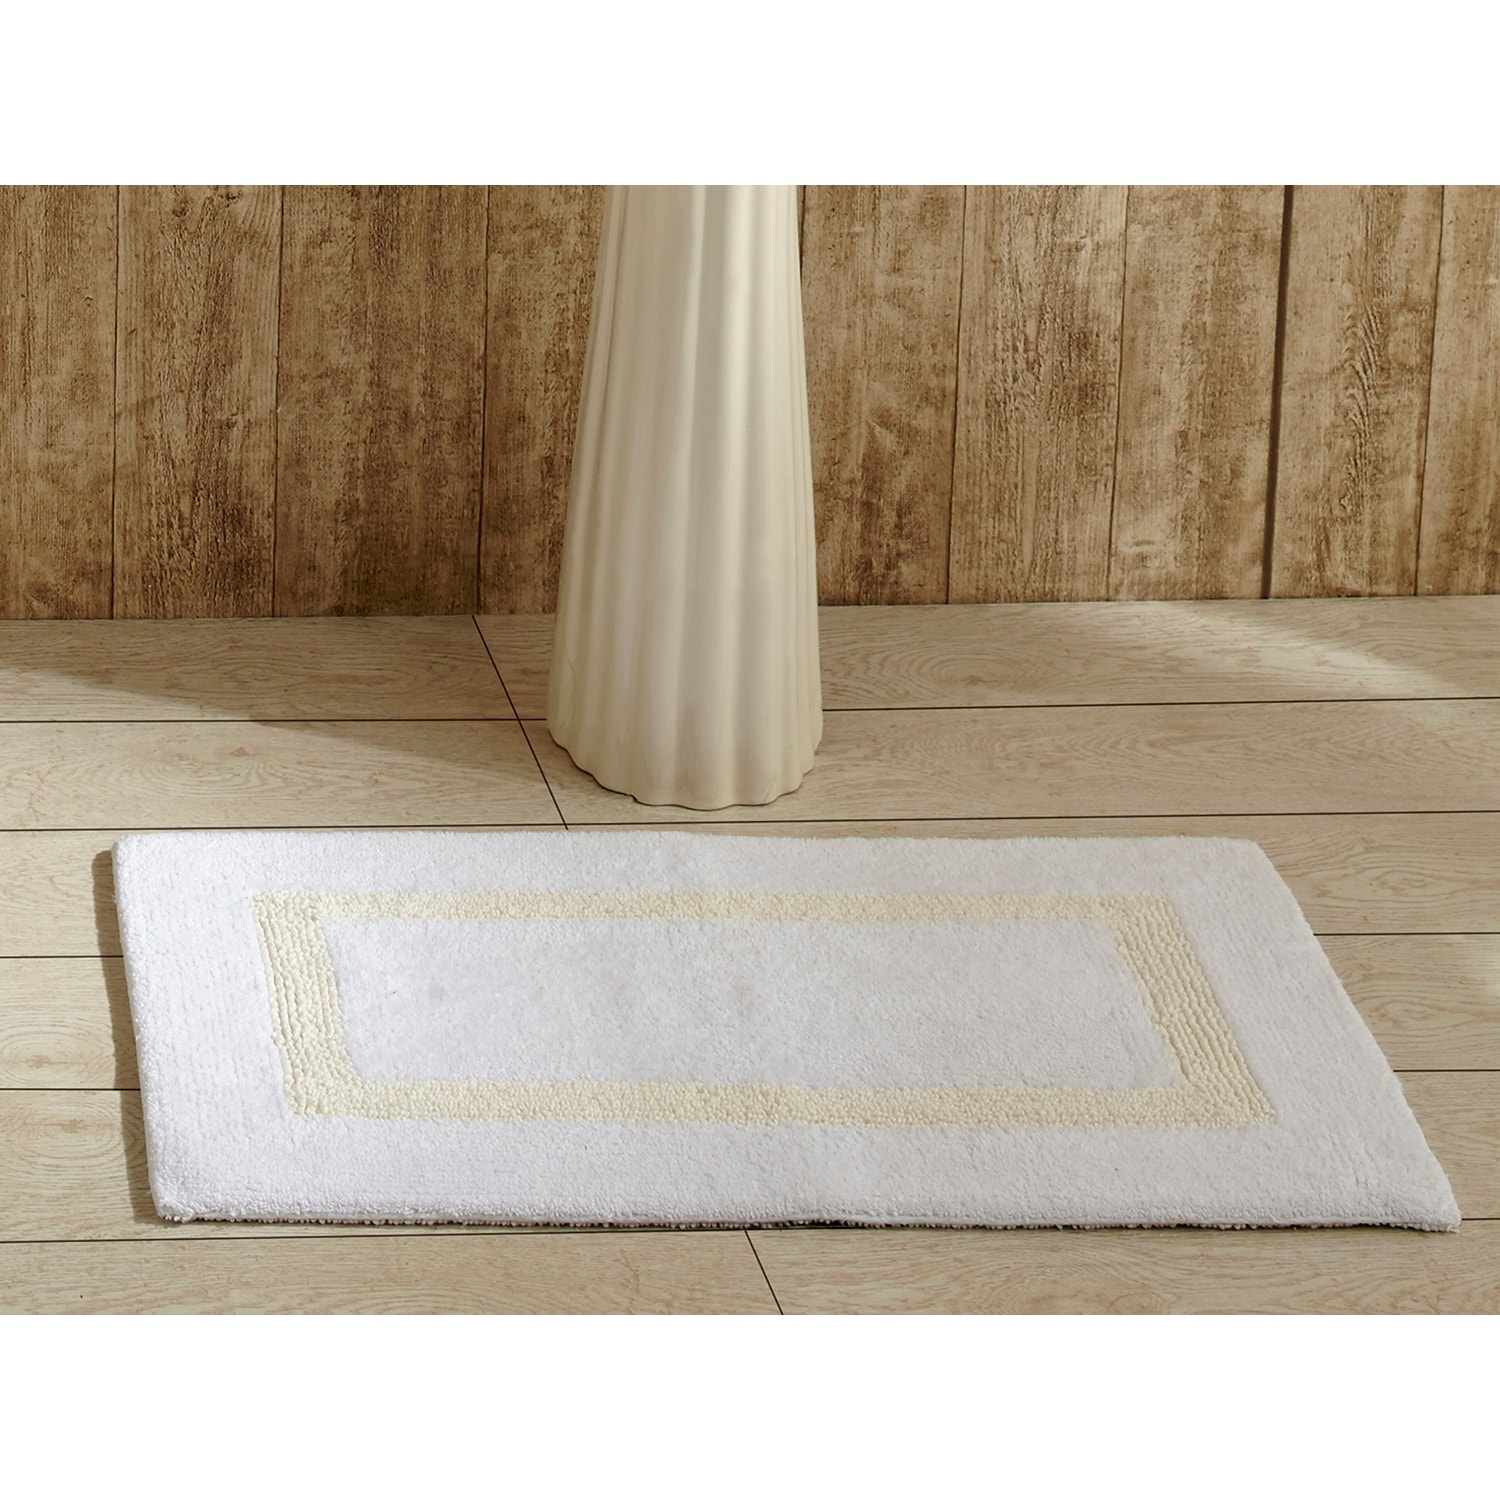 Ethnic Strong Water Absorbent Bath Mats Half Round Entrance